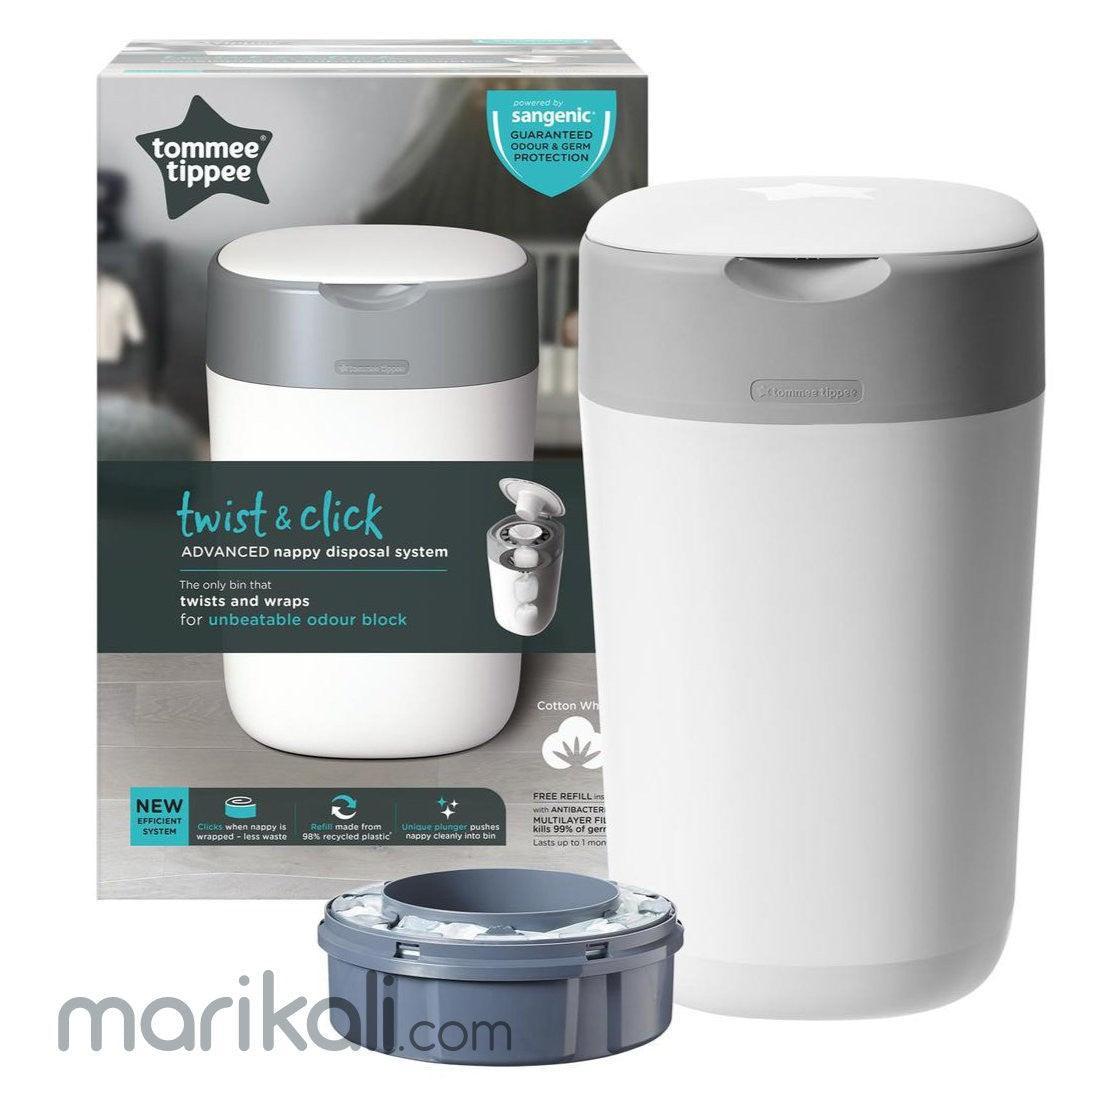 Tommee Tippee - Tommee Tippee Twist & Click Nappy Disposal System - Mari Kali Stores Cyprus